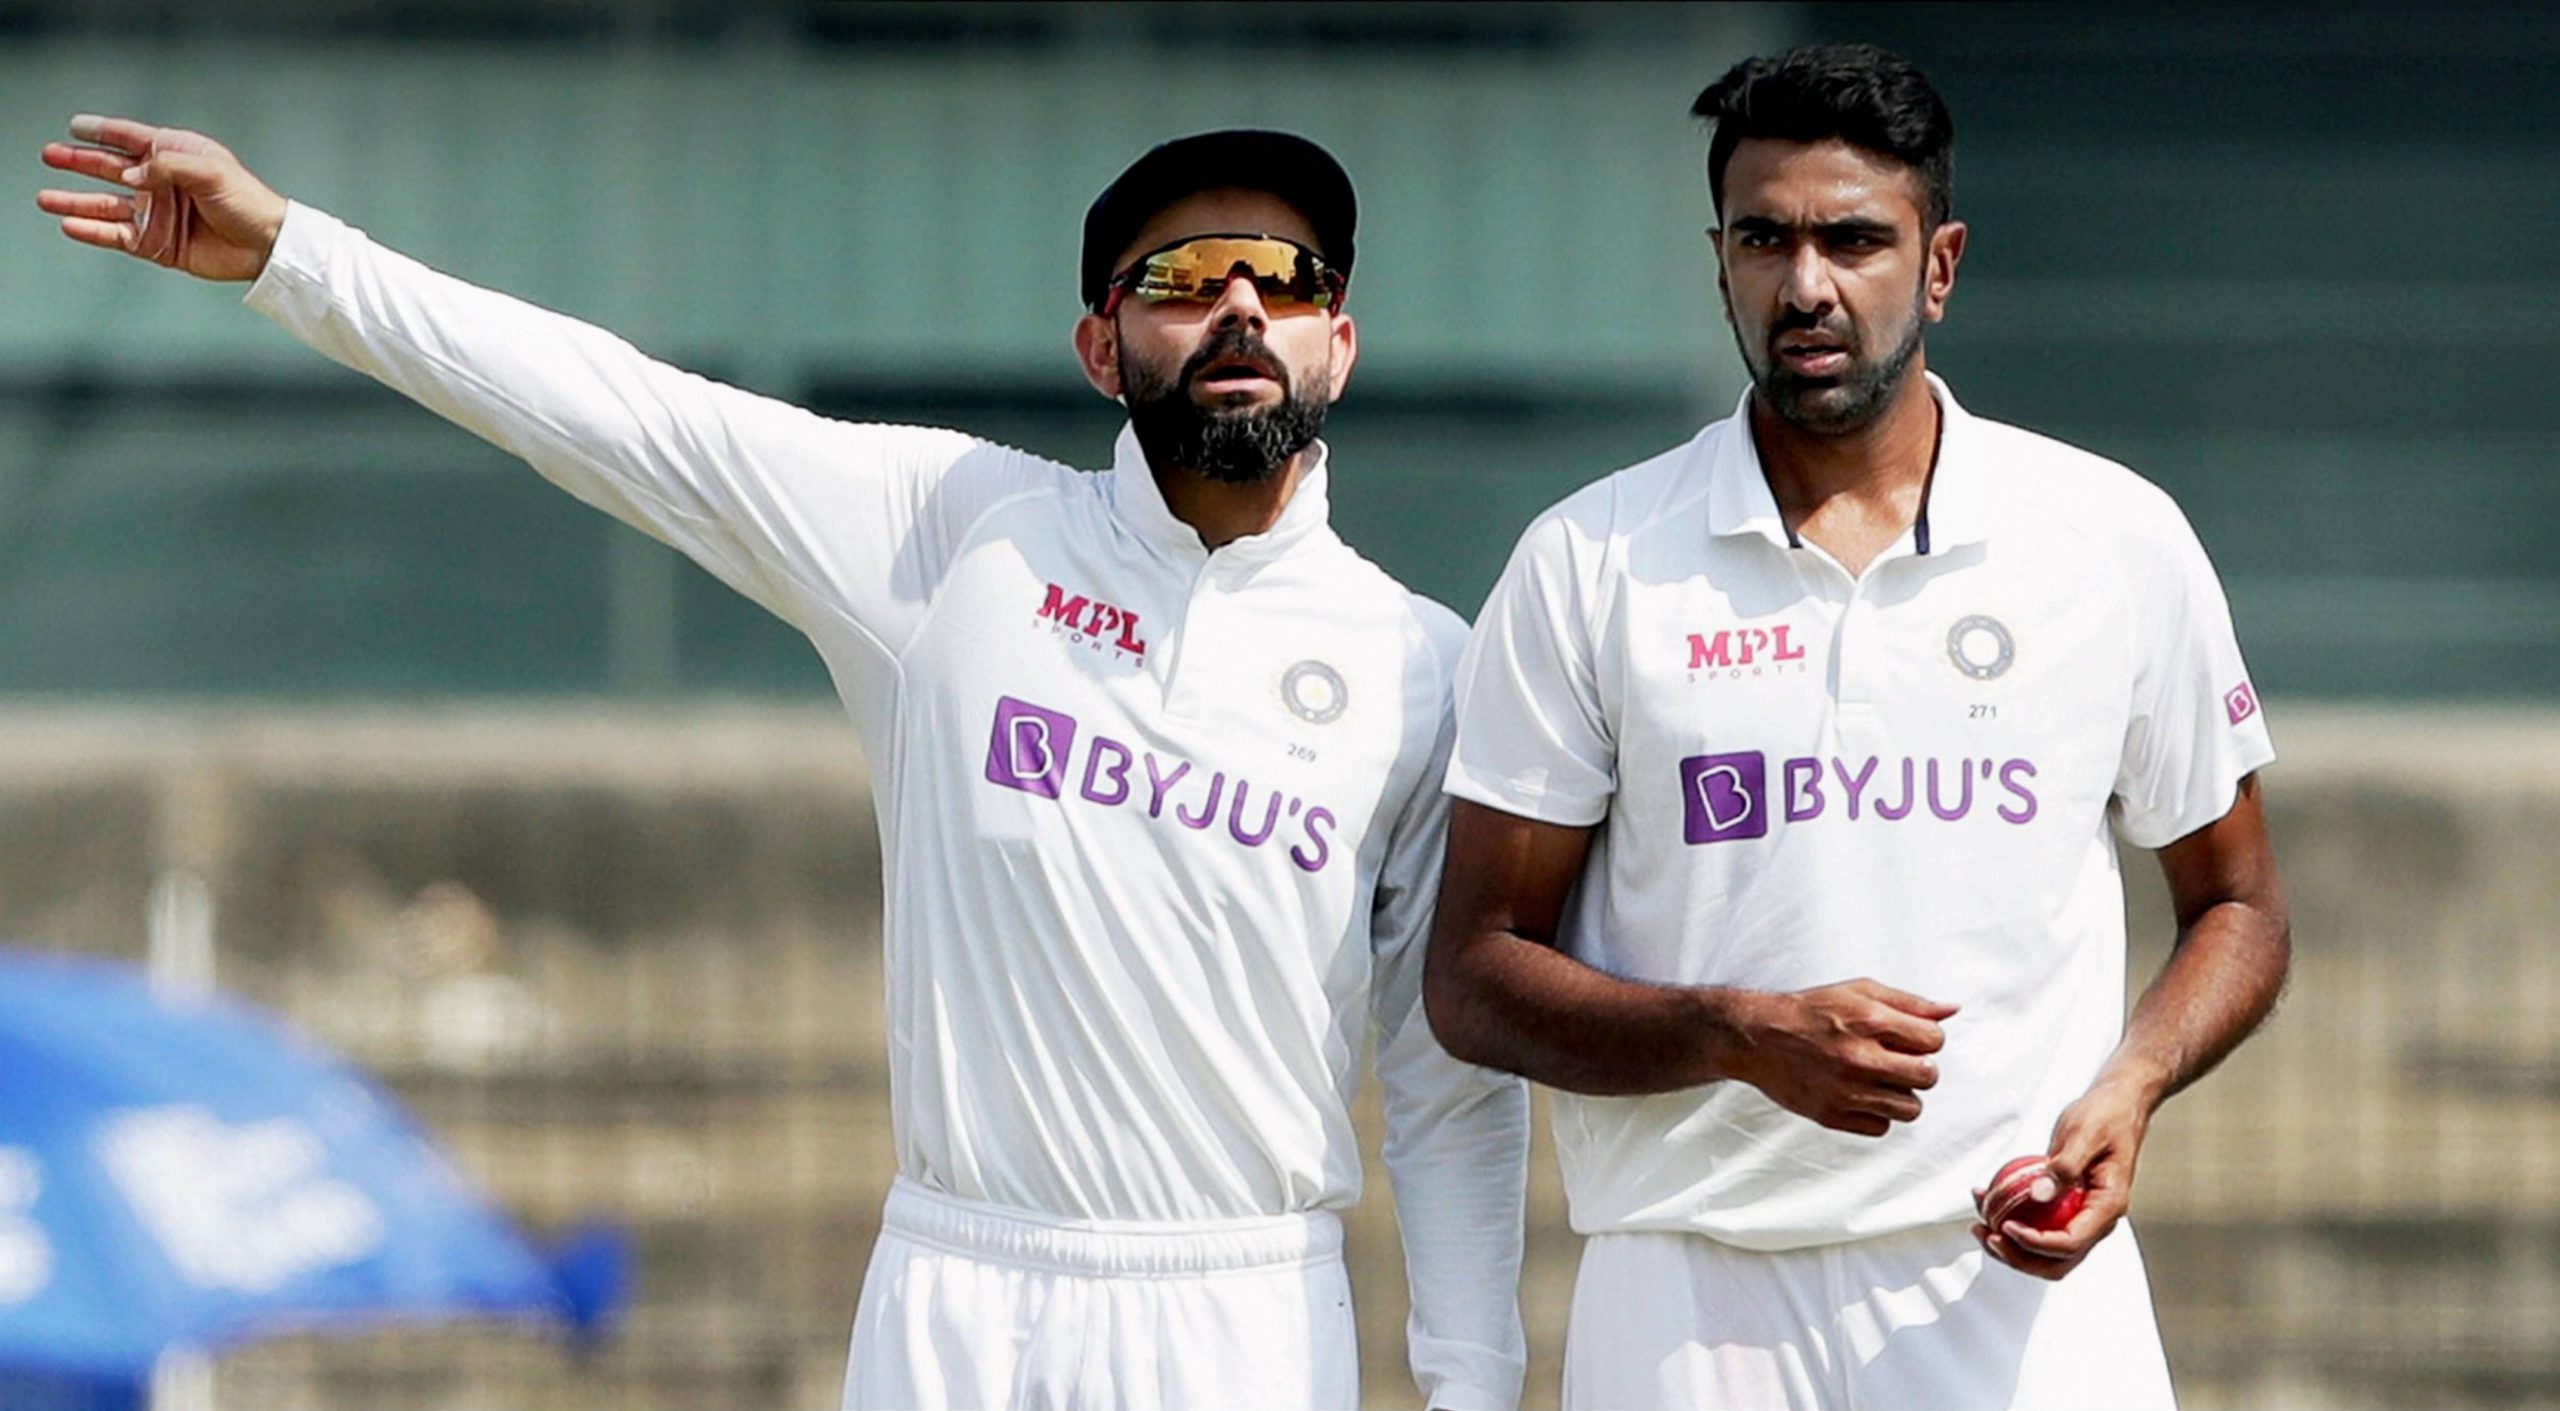 3rd Test: Virat Kohli says both pacers and spinners will play big role in day-night Test